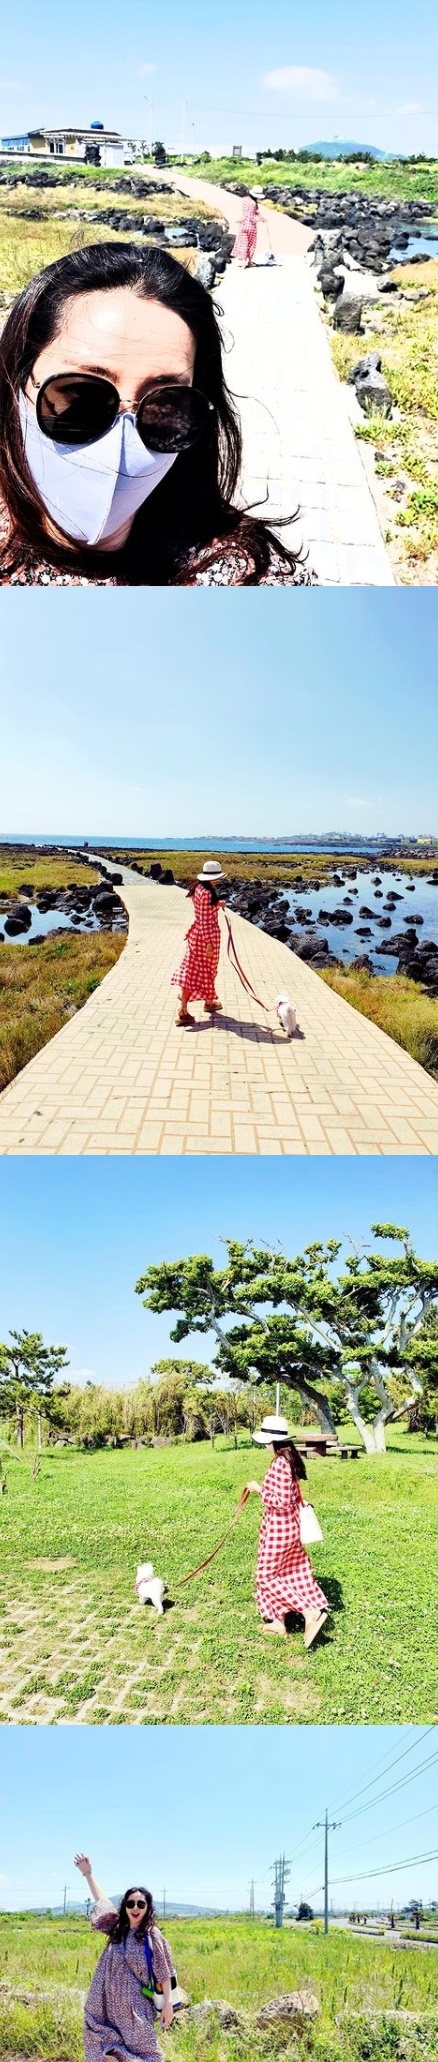 Jeju Island, where Song Yoon-ah has been with his close brother Son Ye-jin, also remembered Travel.Actor Song Yoon-ah posted several photos on his instagram on the afternoon of the 29th, along with an article entitled We miss...our questi giorni.In the photo, Song Yoon-ah and Son Ye-jin leave Travel on Jeju Island.Song Yoon-ah - Son Ye-jin, known as the best friend of the entertainment industry, recently visited Jeju Island Travel.Song Yoon-ah missed Jeju Island Travel with his brother Son Ye-jin, and Son Ye-jin took his dog with him and left a picture of his life without envy.On the other hand, Song Yoon-ah showed JTBC Elegant Friends last year, and Son Ye-jin is taking a rest after TVN Loves emergency.song yoon-ah SNS